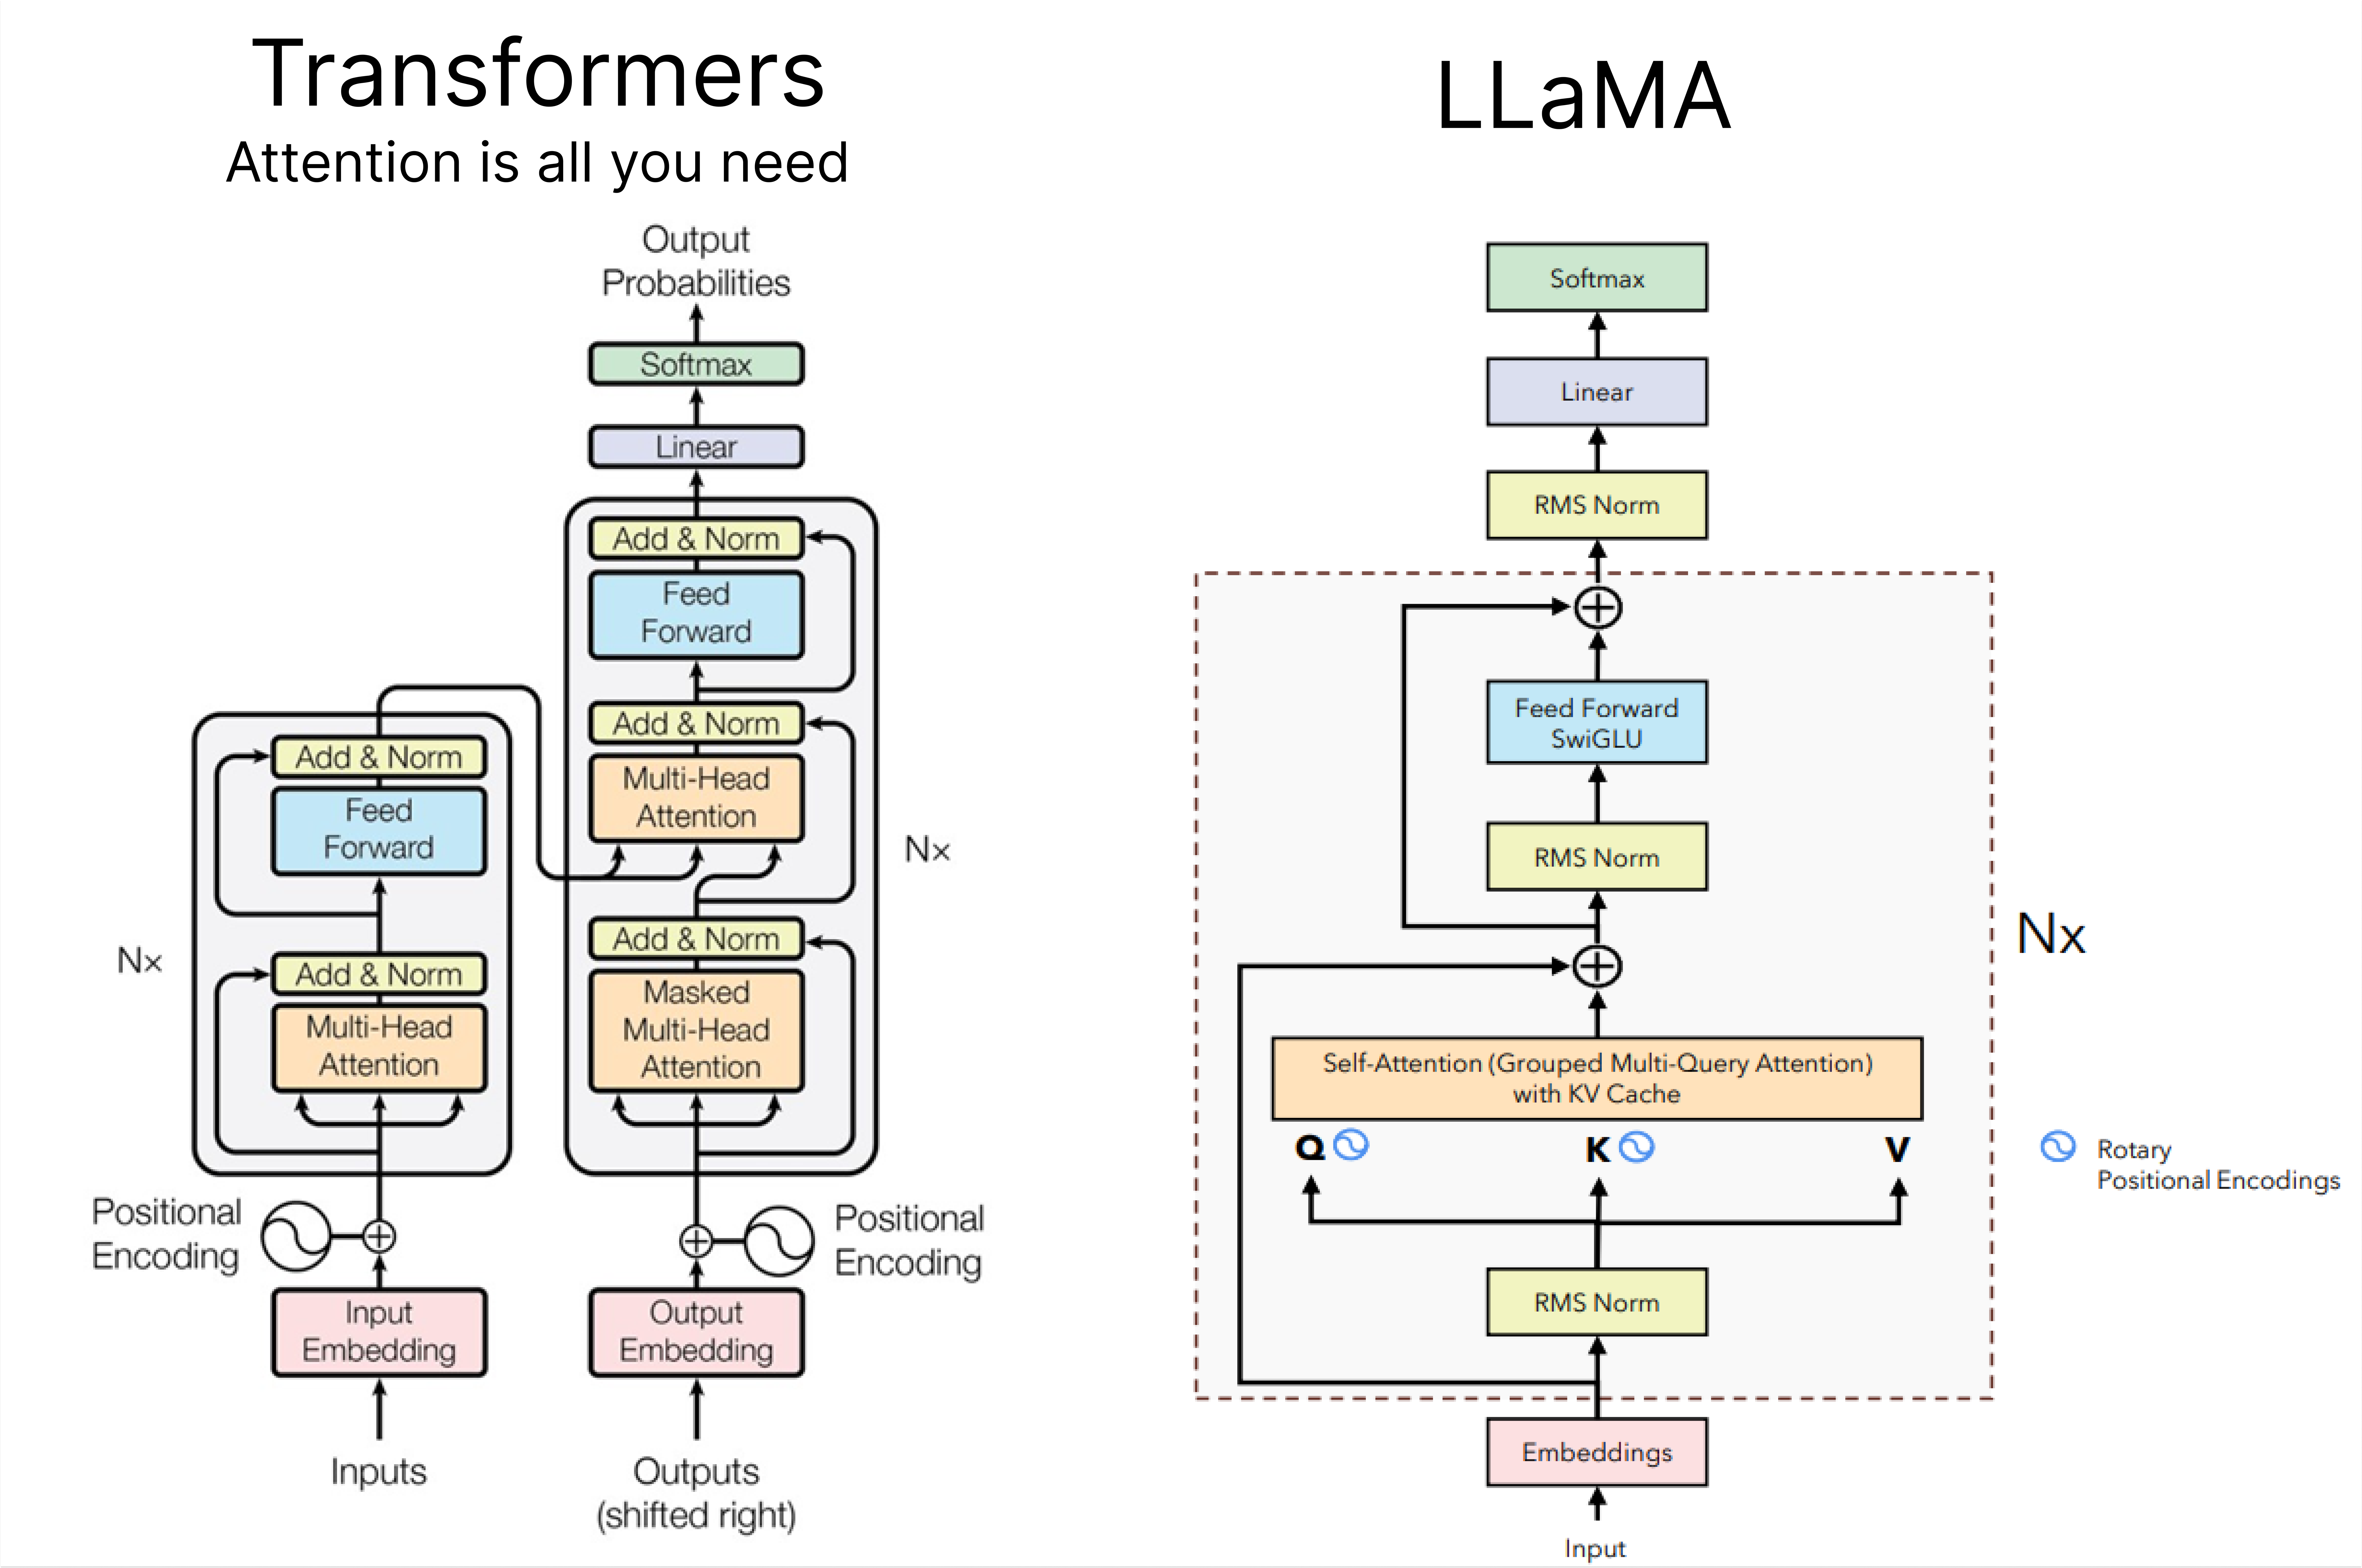 Difference between Transformers and Llama architecture (Llama architecture by Umar Jamil)